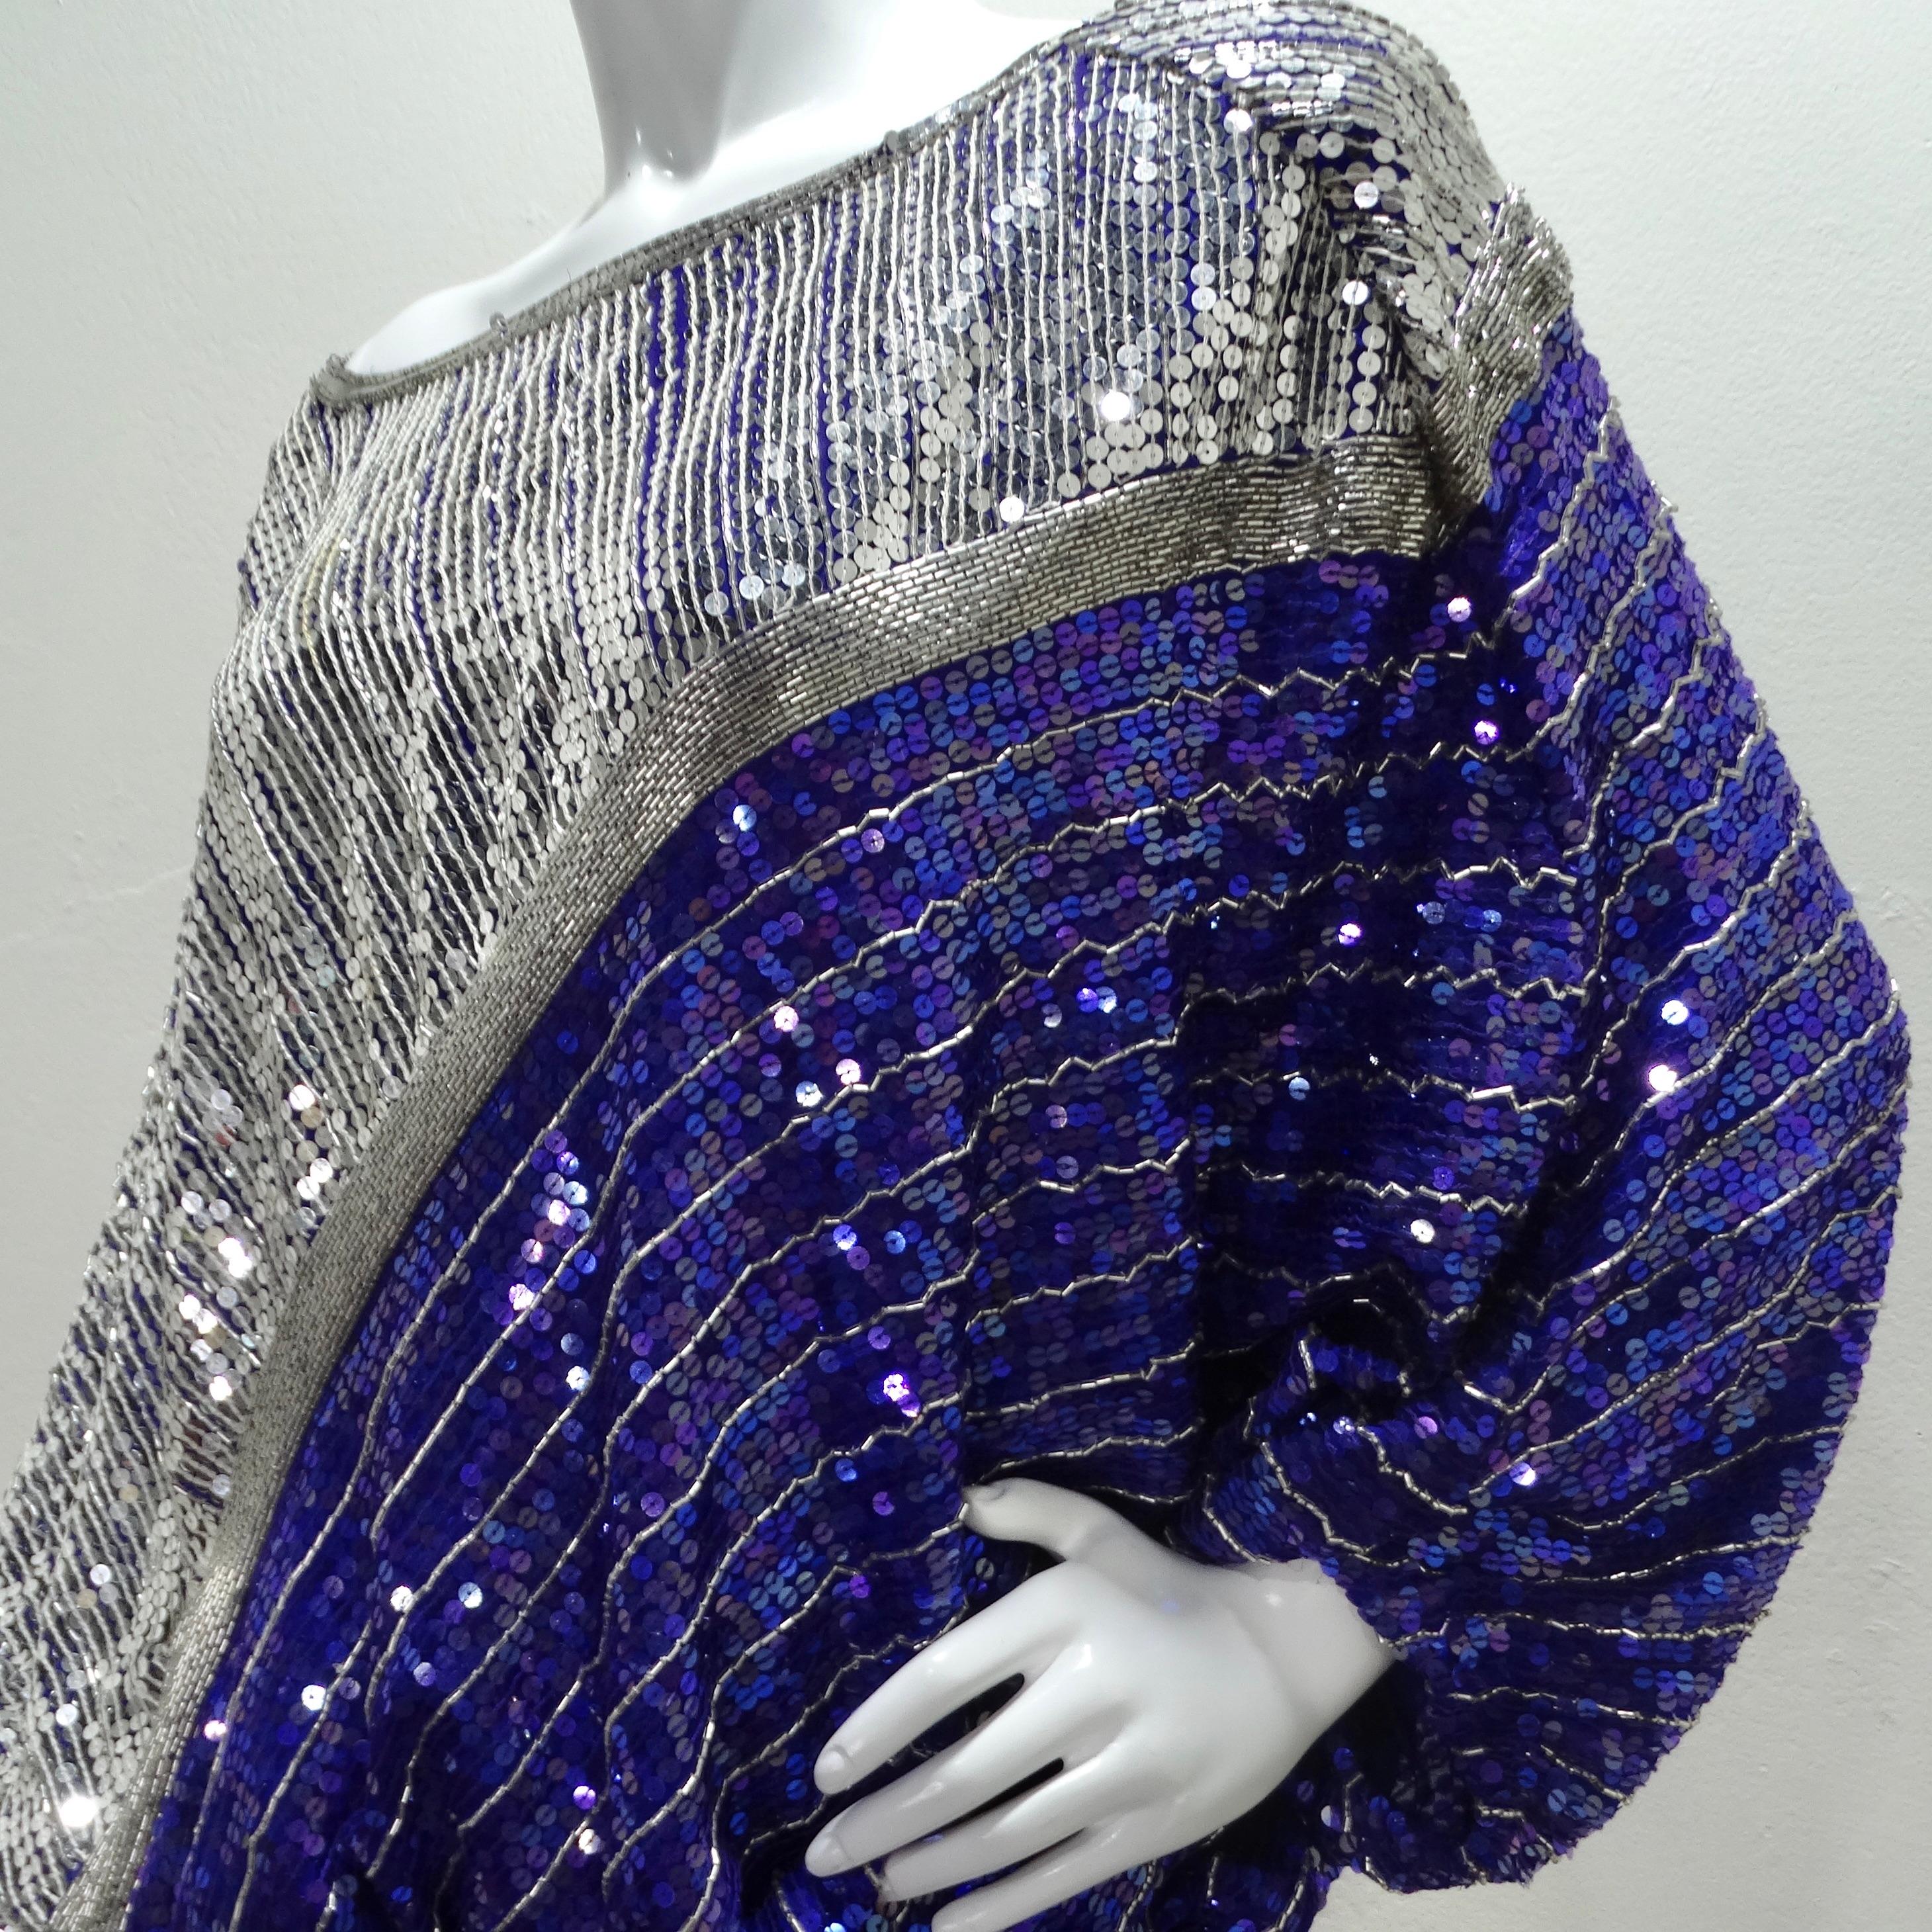 Make a dazzling entrance with the Judith Ann 1980s Purple Sequin Kaftan Dress – a show-stopping cocktail dress that epitomizes the bold and glamorous spirit of the 80s. This unique kaftan-style dress boasts a drop waist, a removable purple